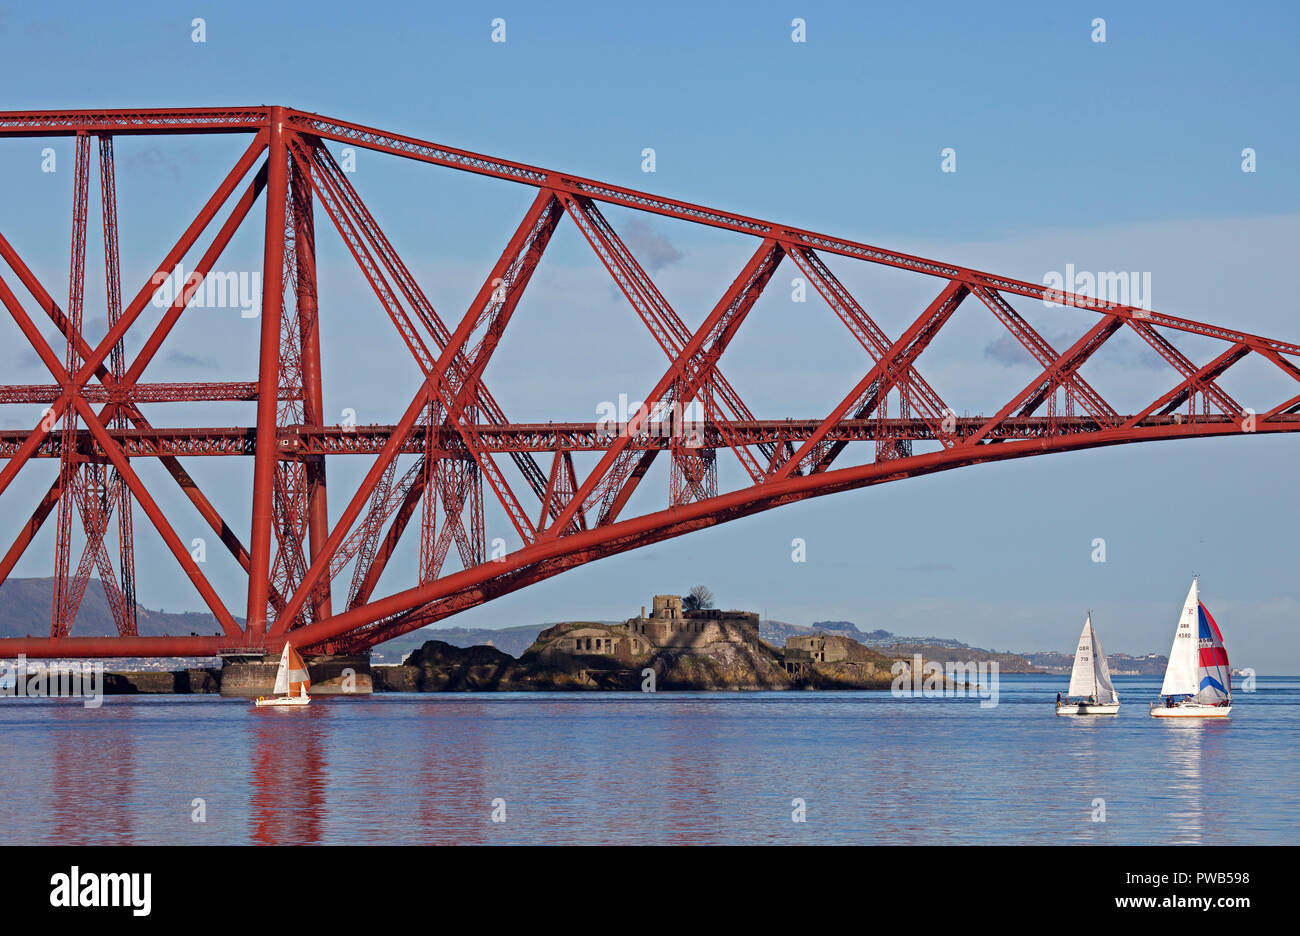 Edinburgh, UK. 14 October 2018. UK weather, after a very cloudy cold morning the sun appeared in early afternoon and at 13 degrees it felt warm in the sunshine, not much wind to assist the crews of the small sail boats in the Forth estuary under the Forth Rail Bridge. Stock Photo